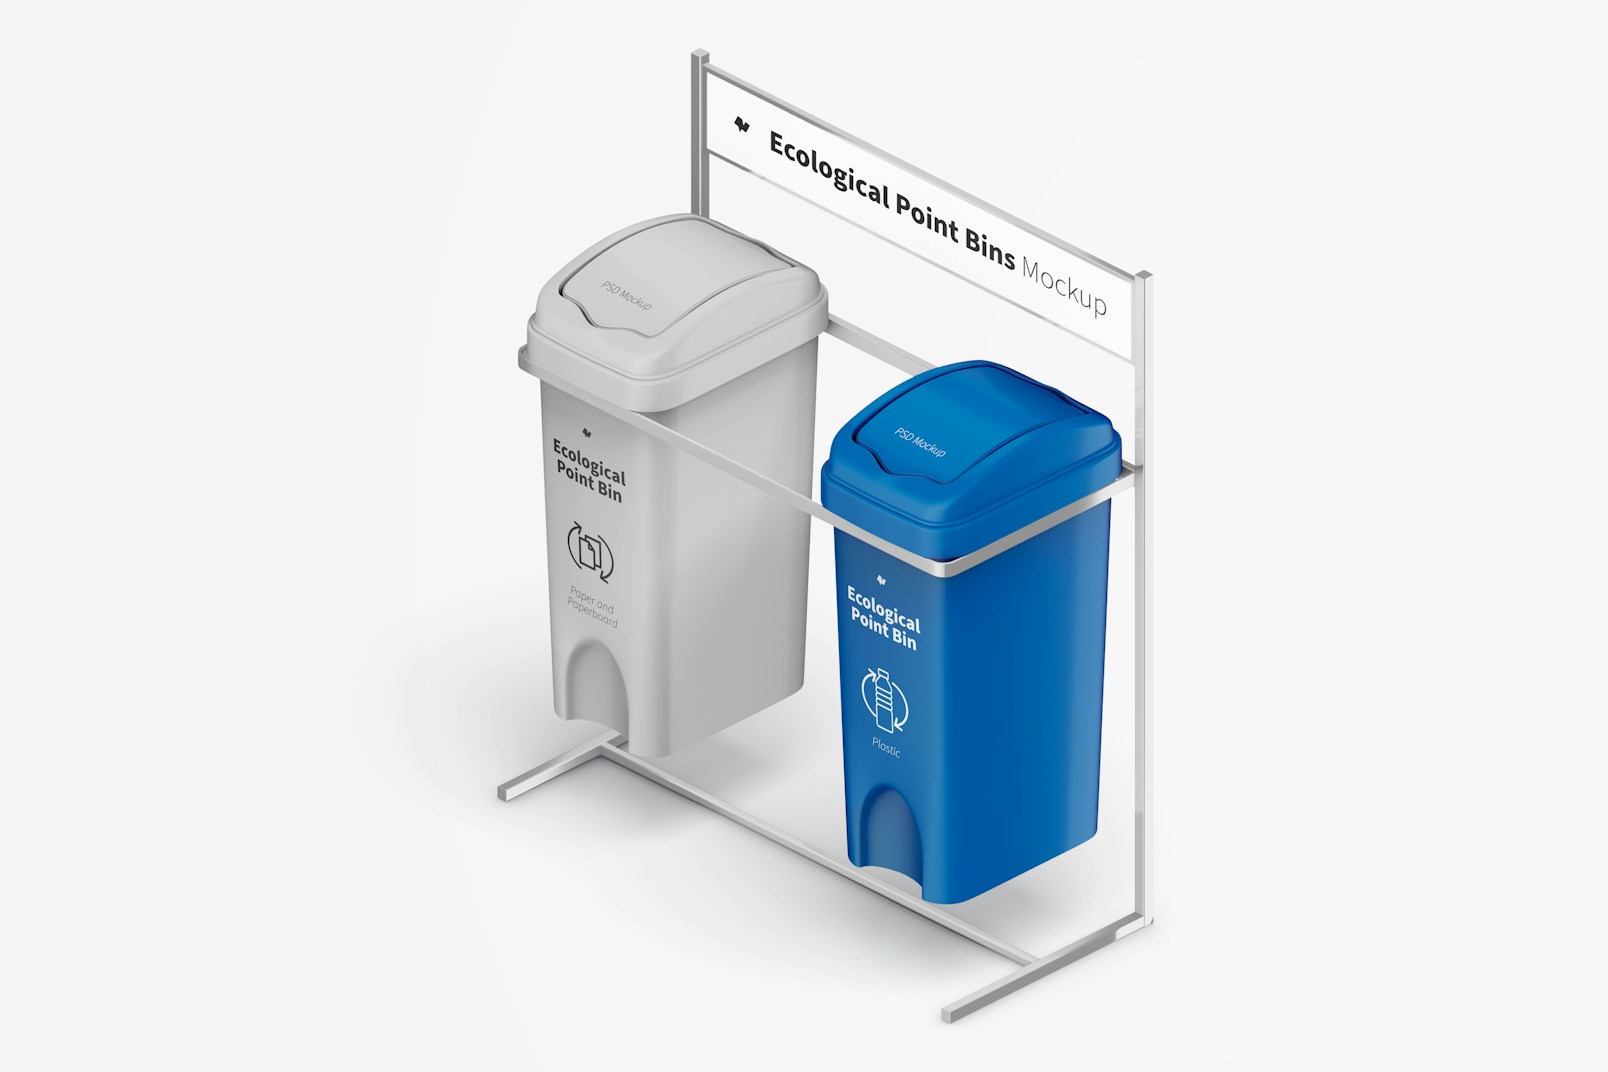 Ecological Point Bins Mockup, Isometric Right View